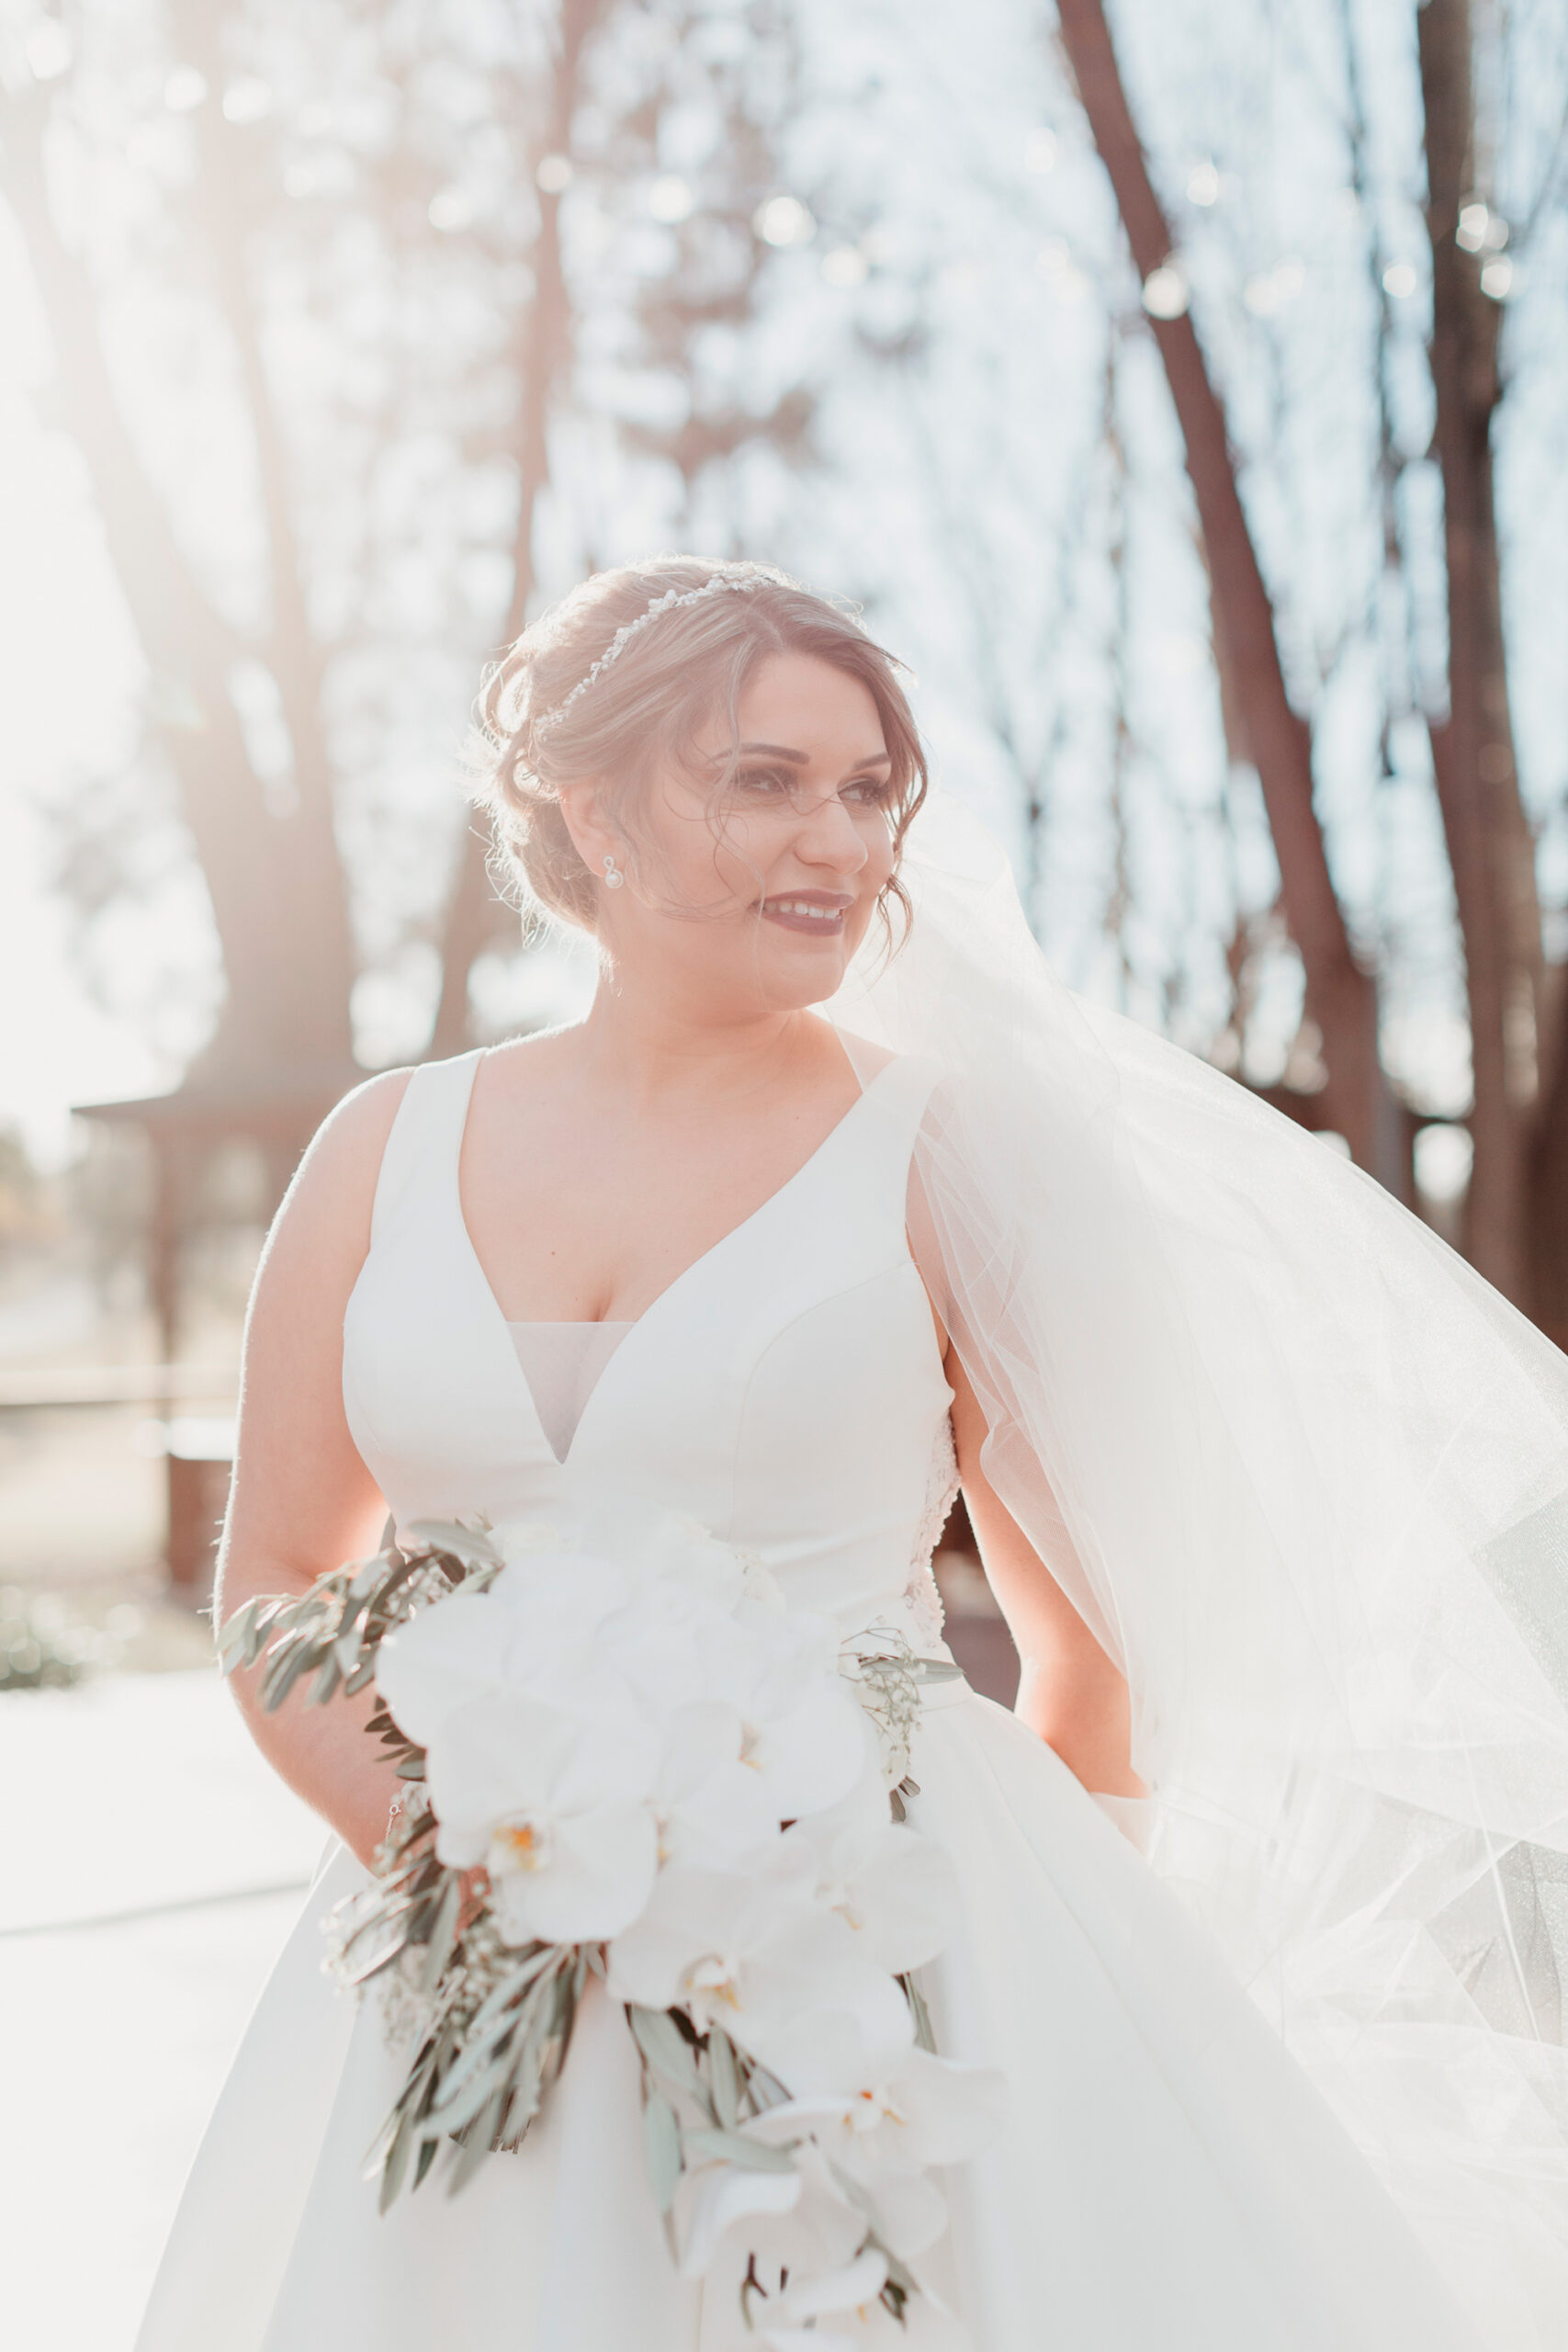 Melanie Jacob Modern Classic Wedding Perfect Moment Photography SBS 027 scaled